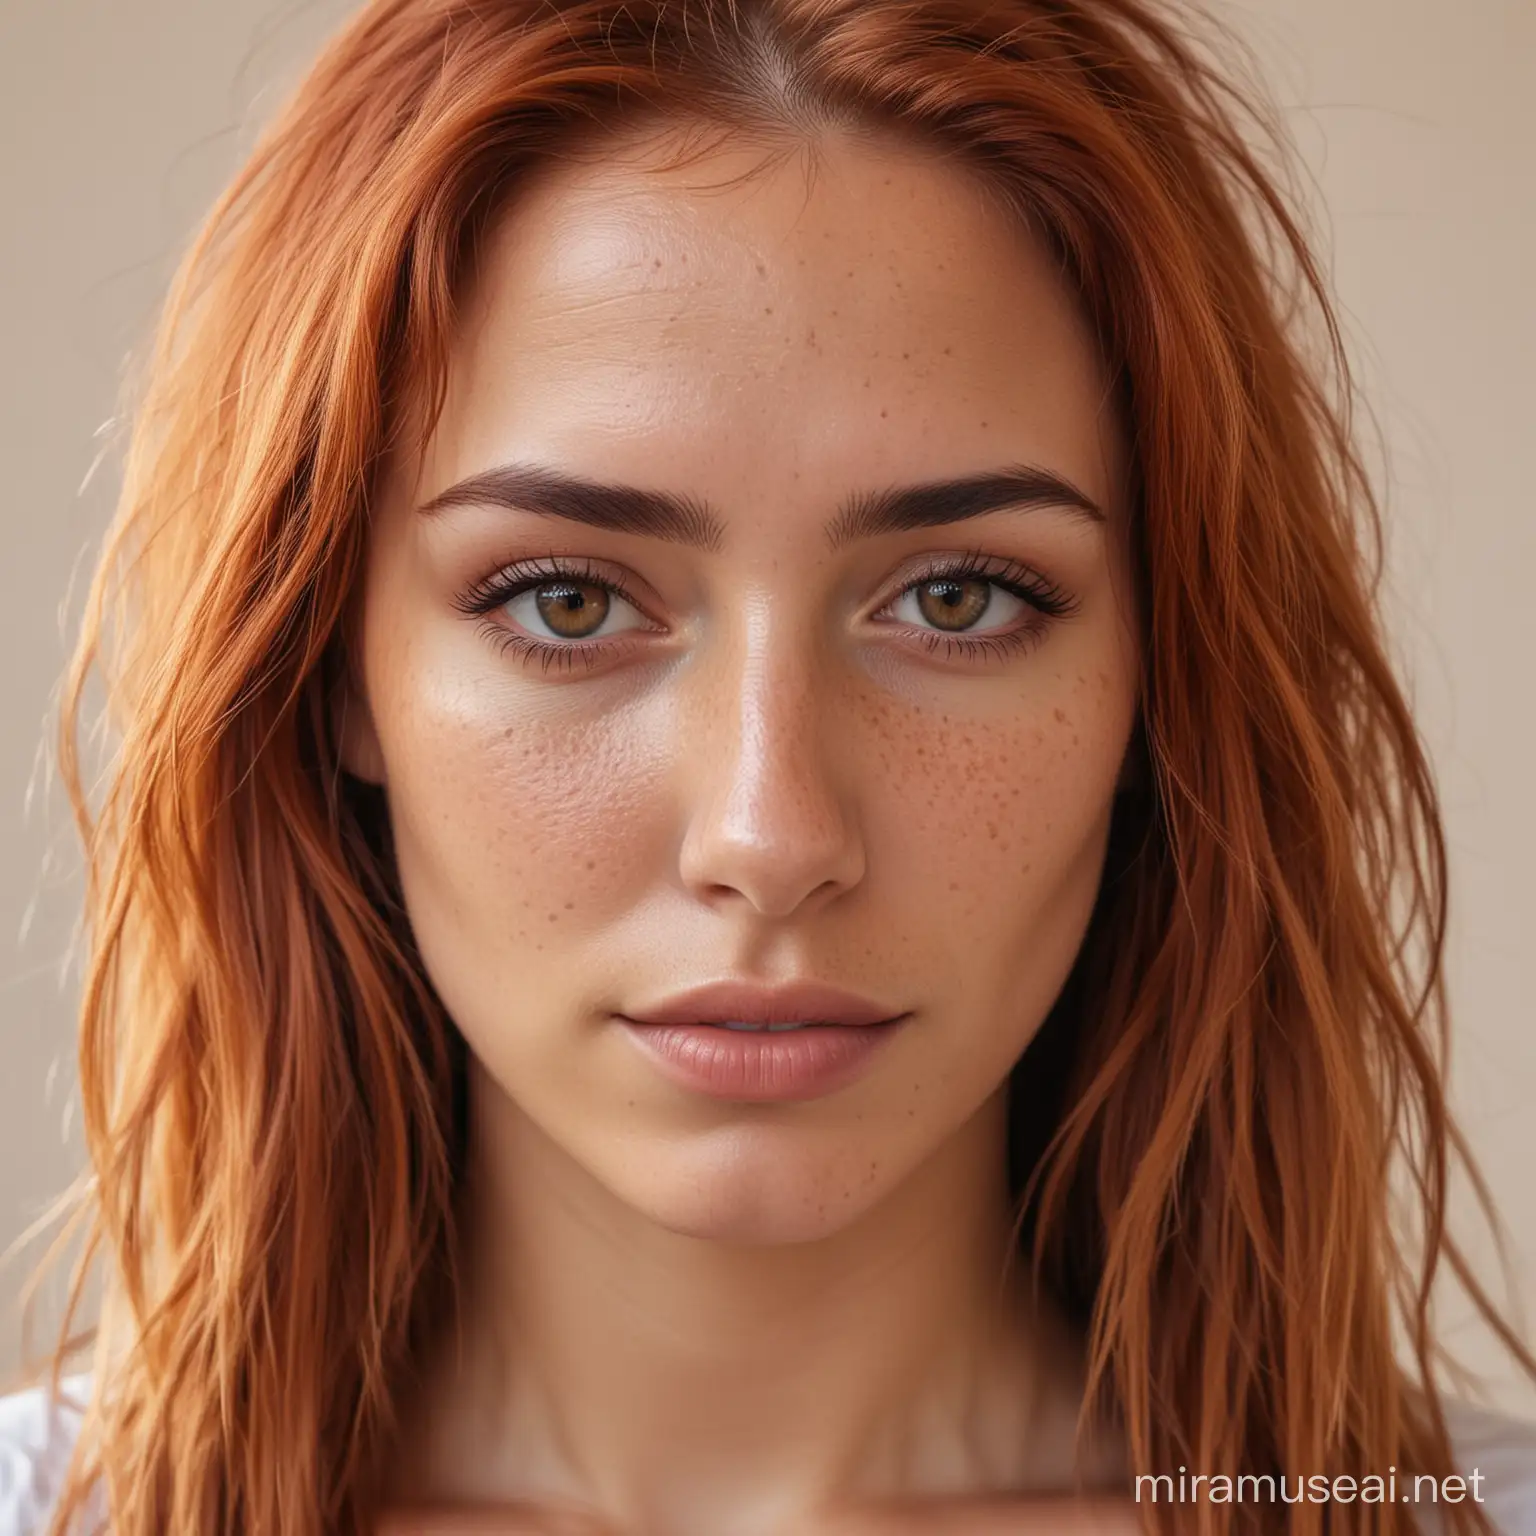 Spanish Influencer with Red Hair and Freckles in 8K Portrait